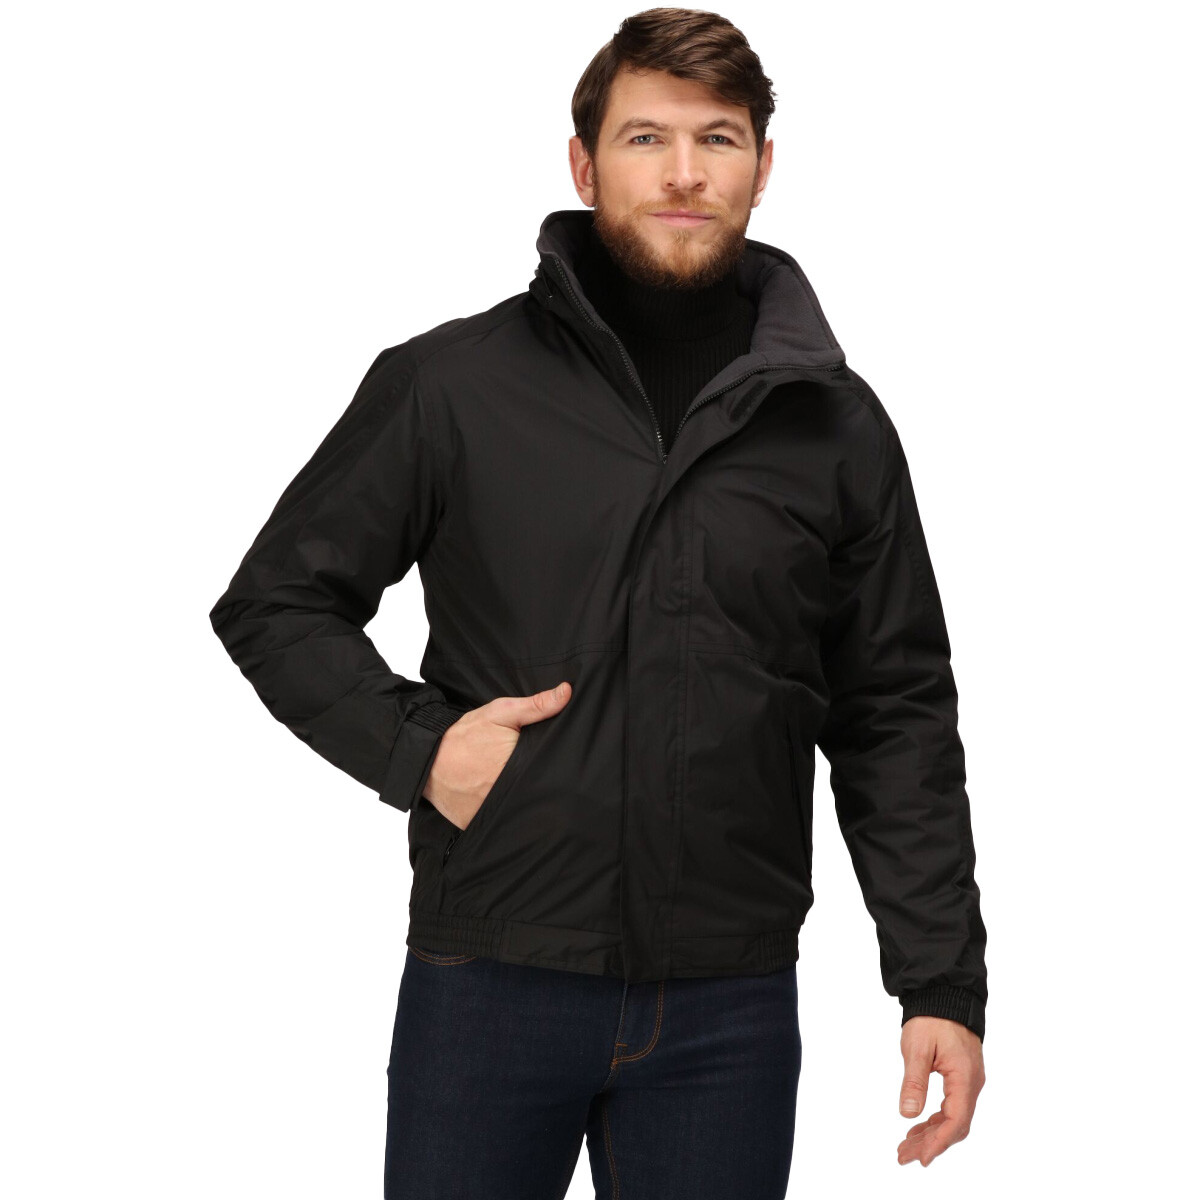 Regatta TRW297 Dover Fleece Lined Bomber Jacket from Lawson HIS